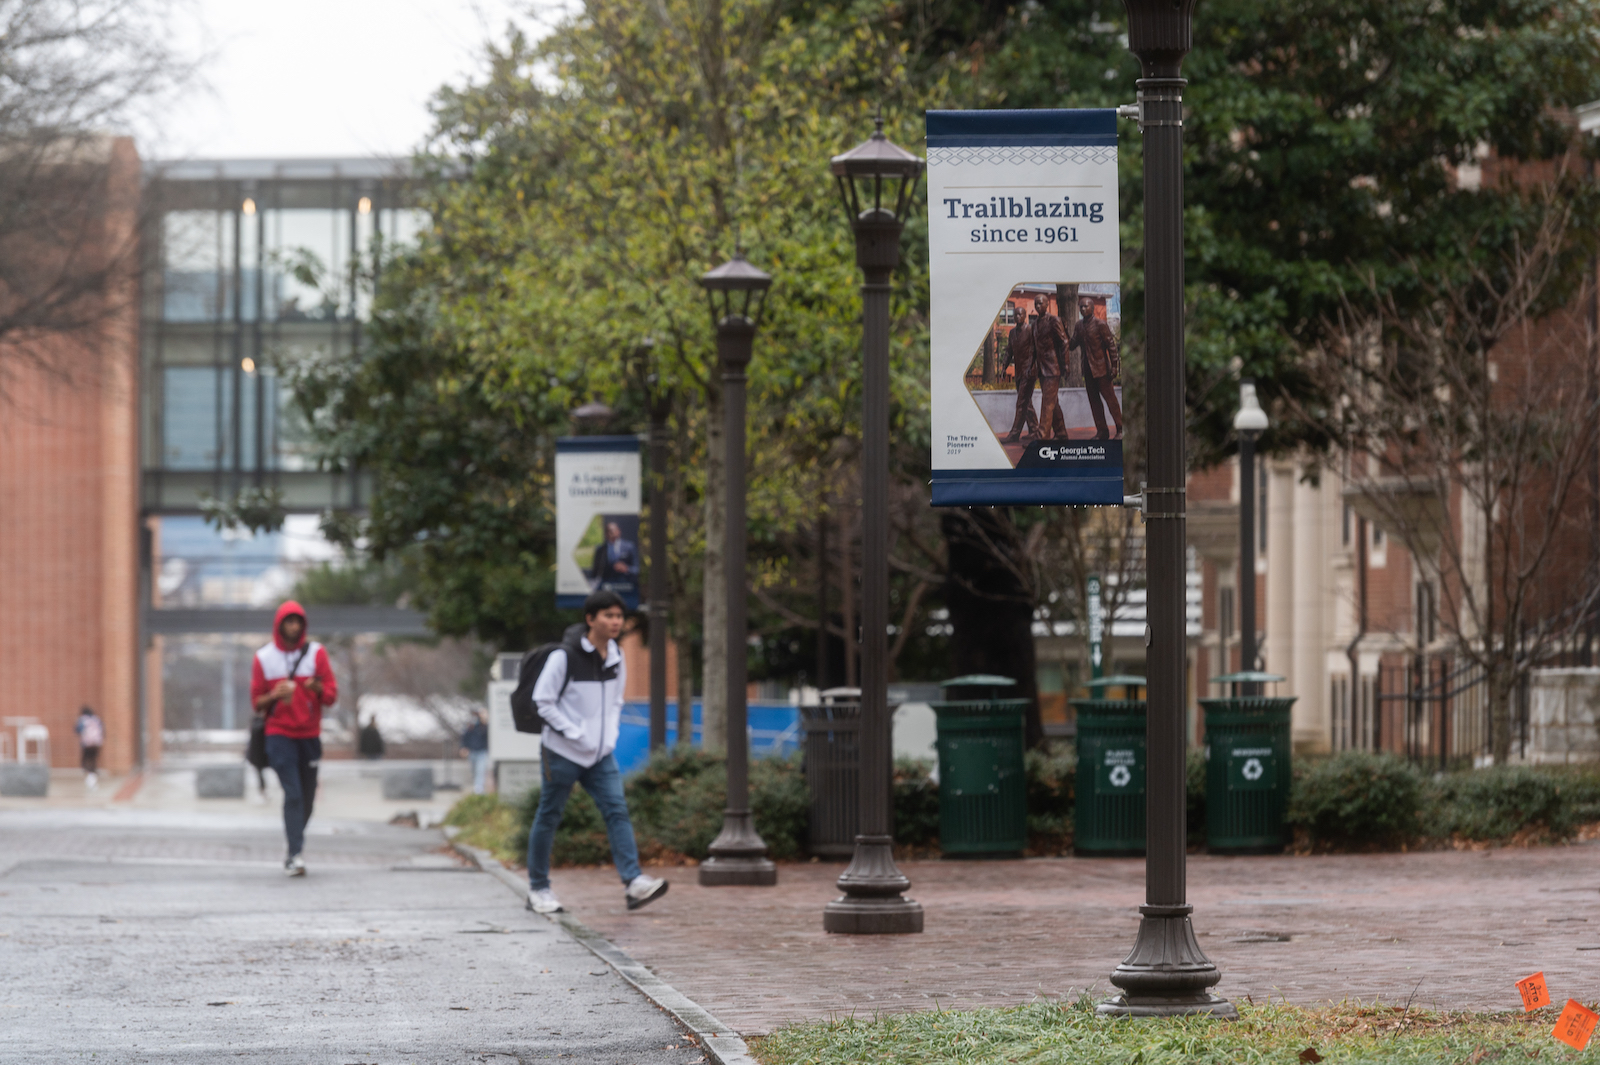 The four-banner series highlights past, present, and future Georgia Tech trailblazers. A total of 24 banners are affixed to light poles across campus and will be on display through the end of May. (Photo by Allison Carter)